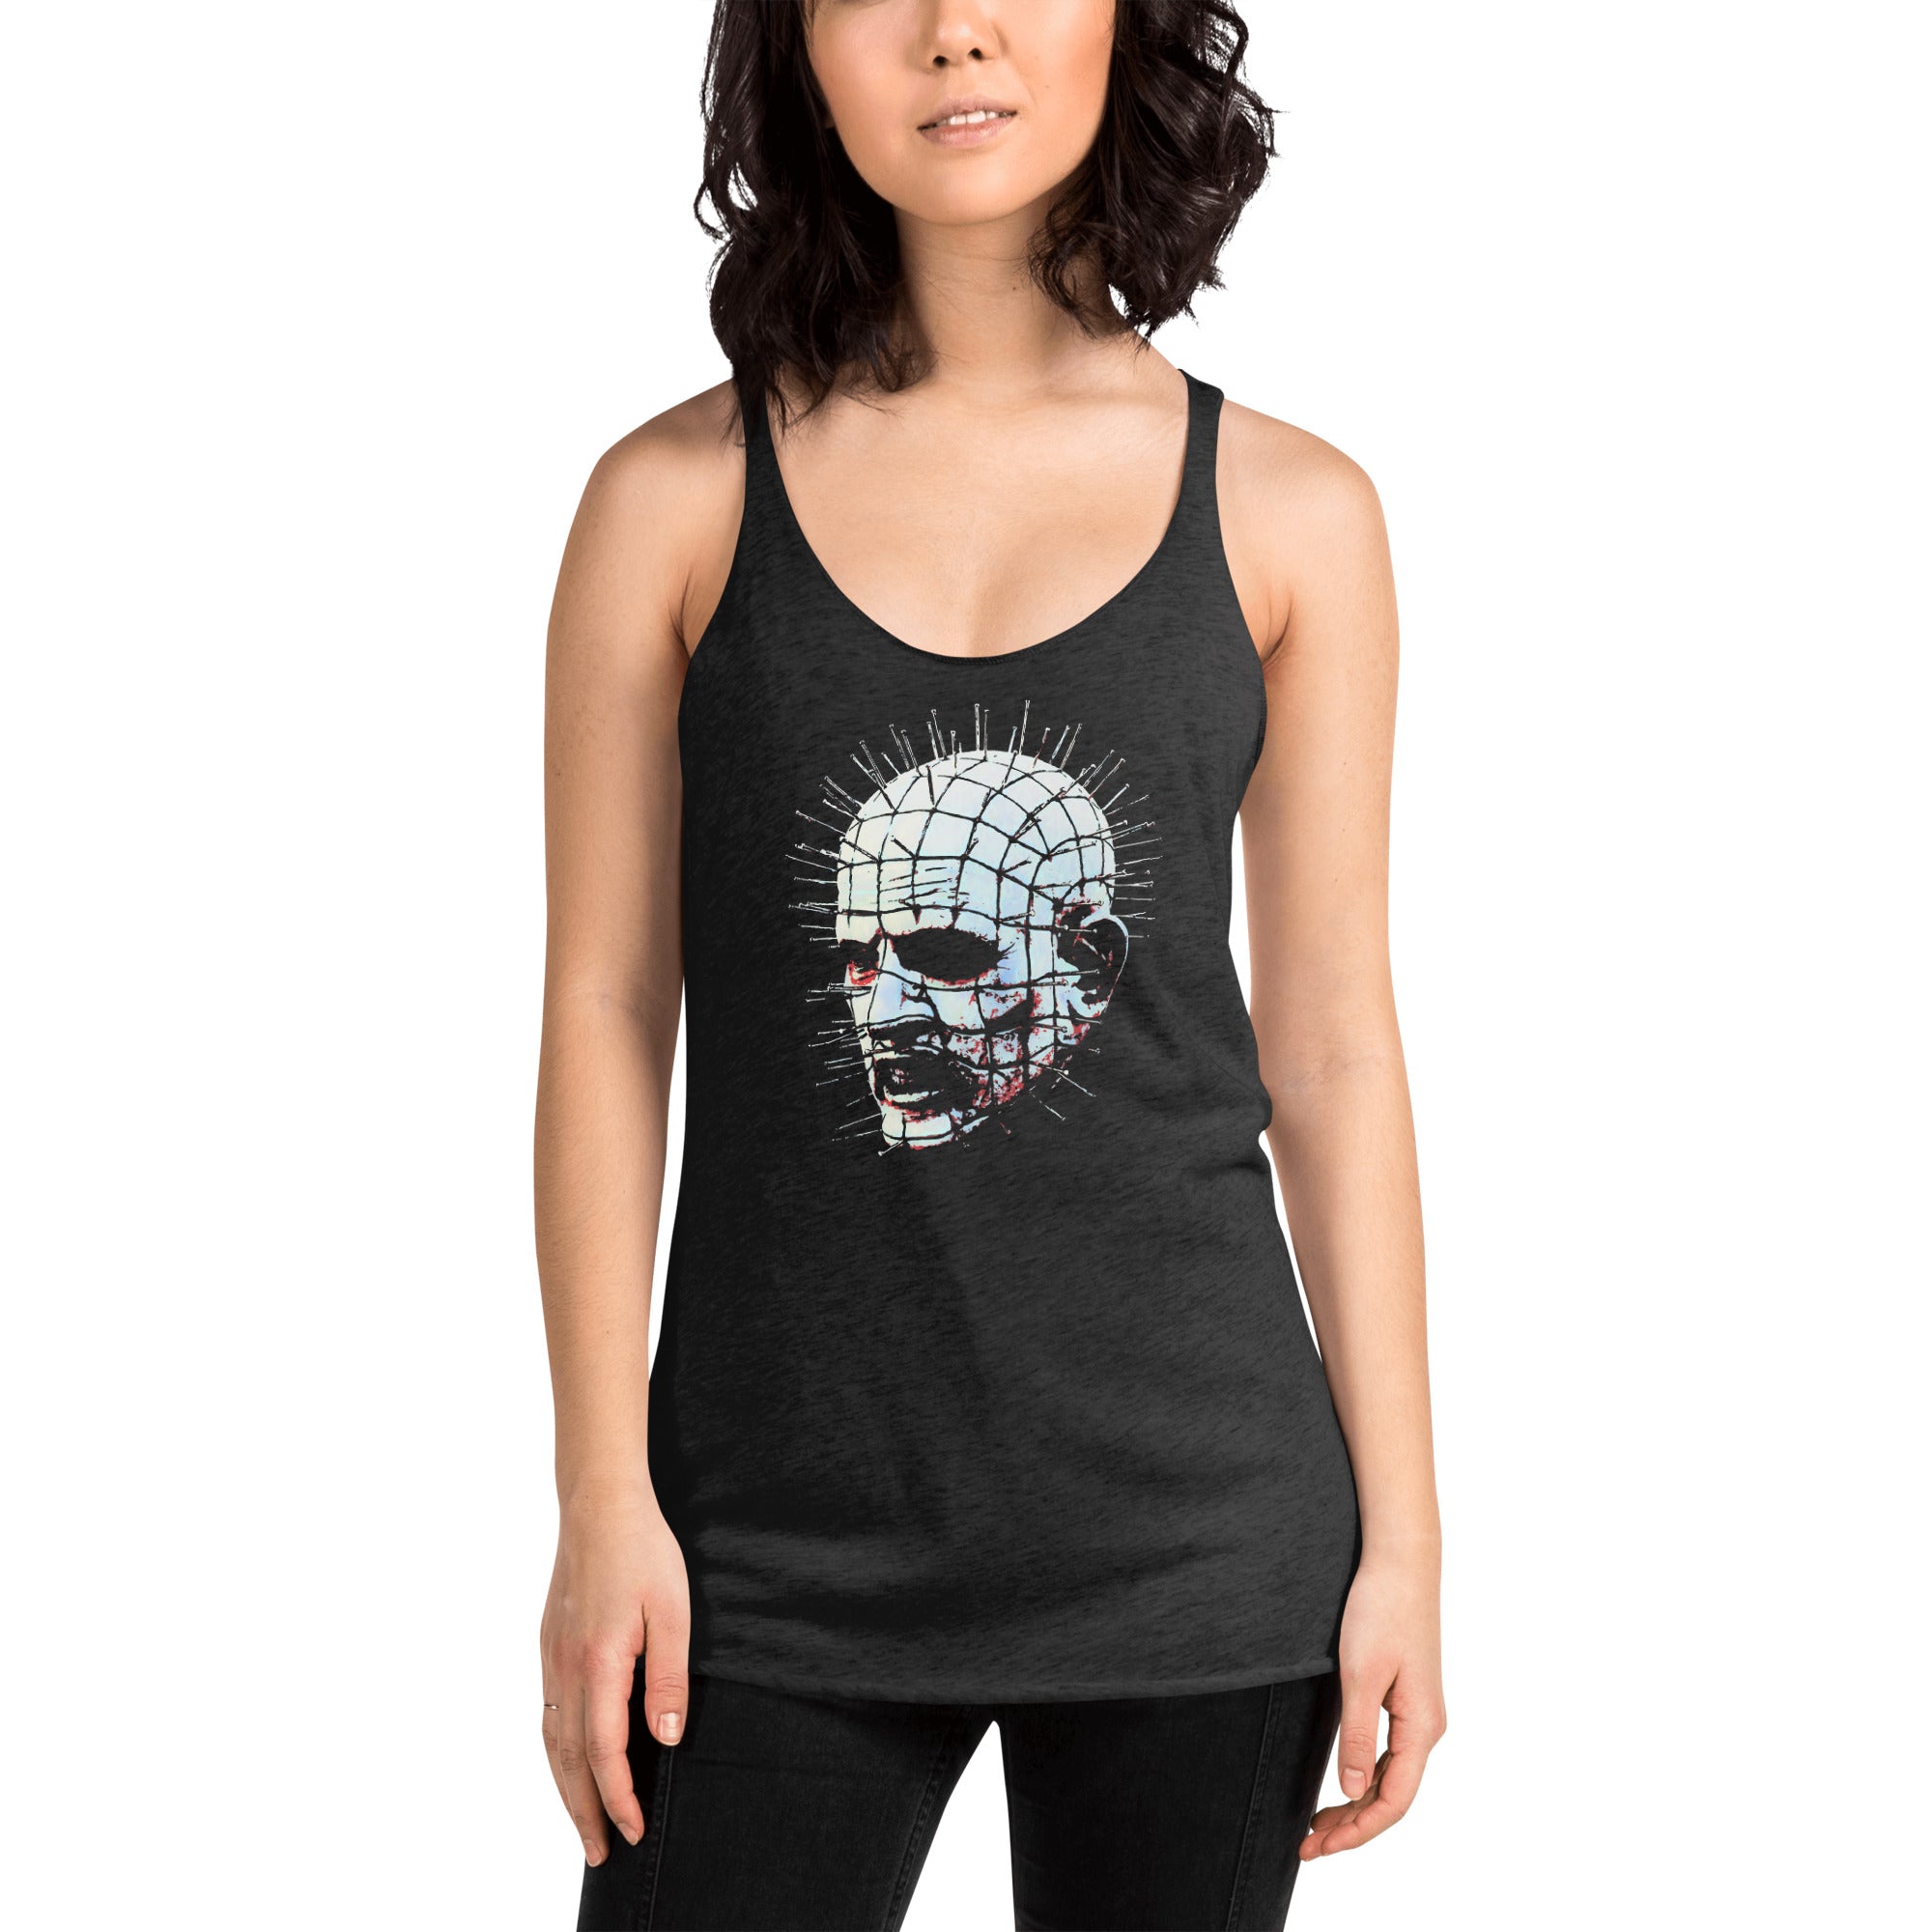 The Hell Priest Cenobite of Hellbound Heart Women's Racerback Tank Top Shirt